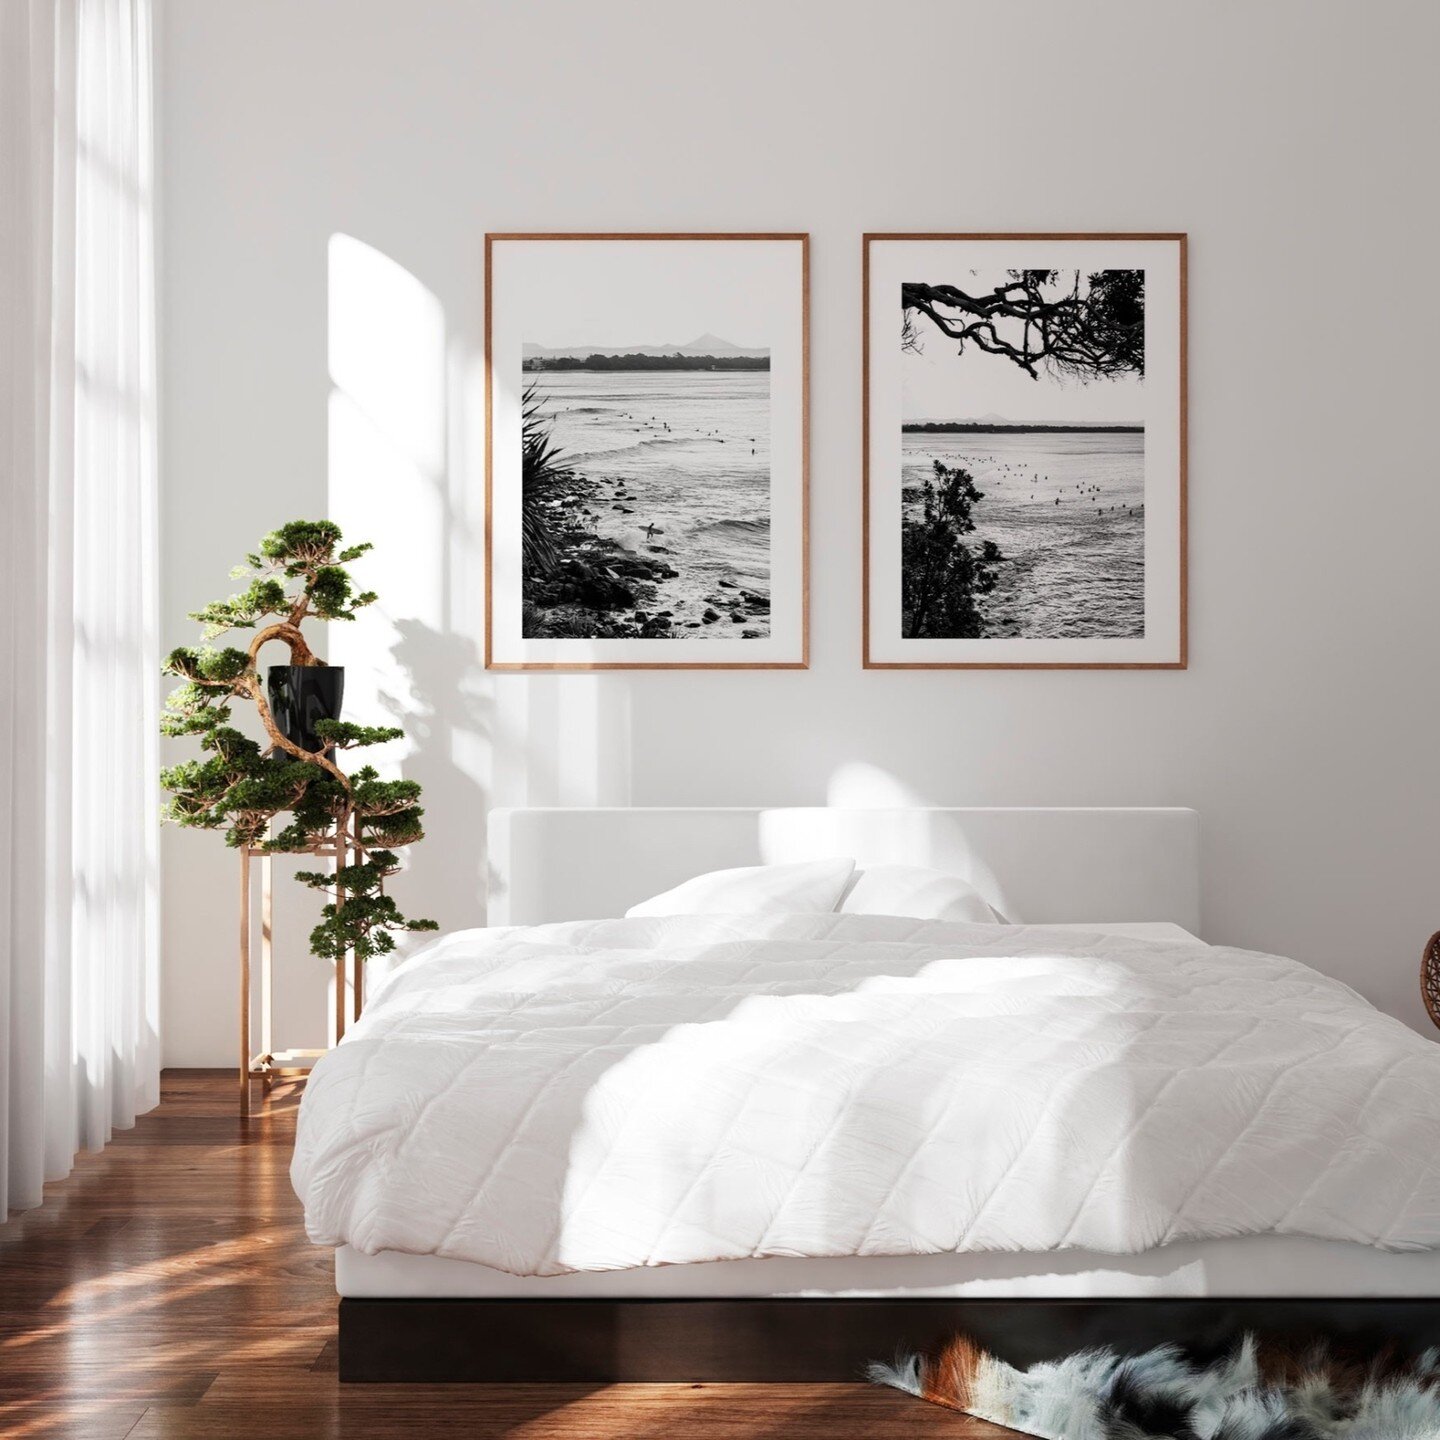 'Noosa in B&amp;W' is one of the many sets you can find in the print shop. Swipe through to see framing options and then pop over to the website and check it out 🥳👏 

🌟Free Shipping 
🌟Images printed on Hahnemuhle fine art 308gsm paper 
🌟Frames a